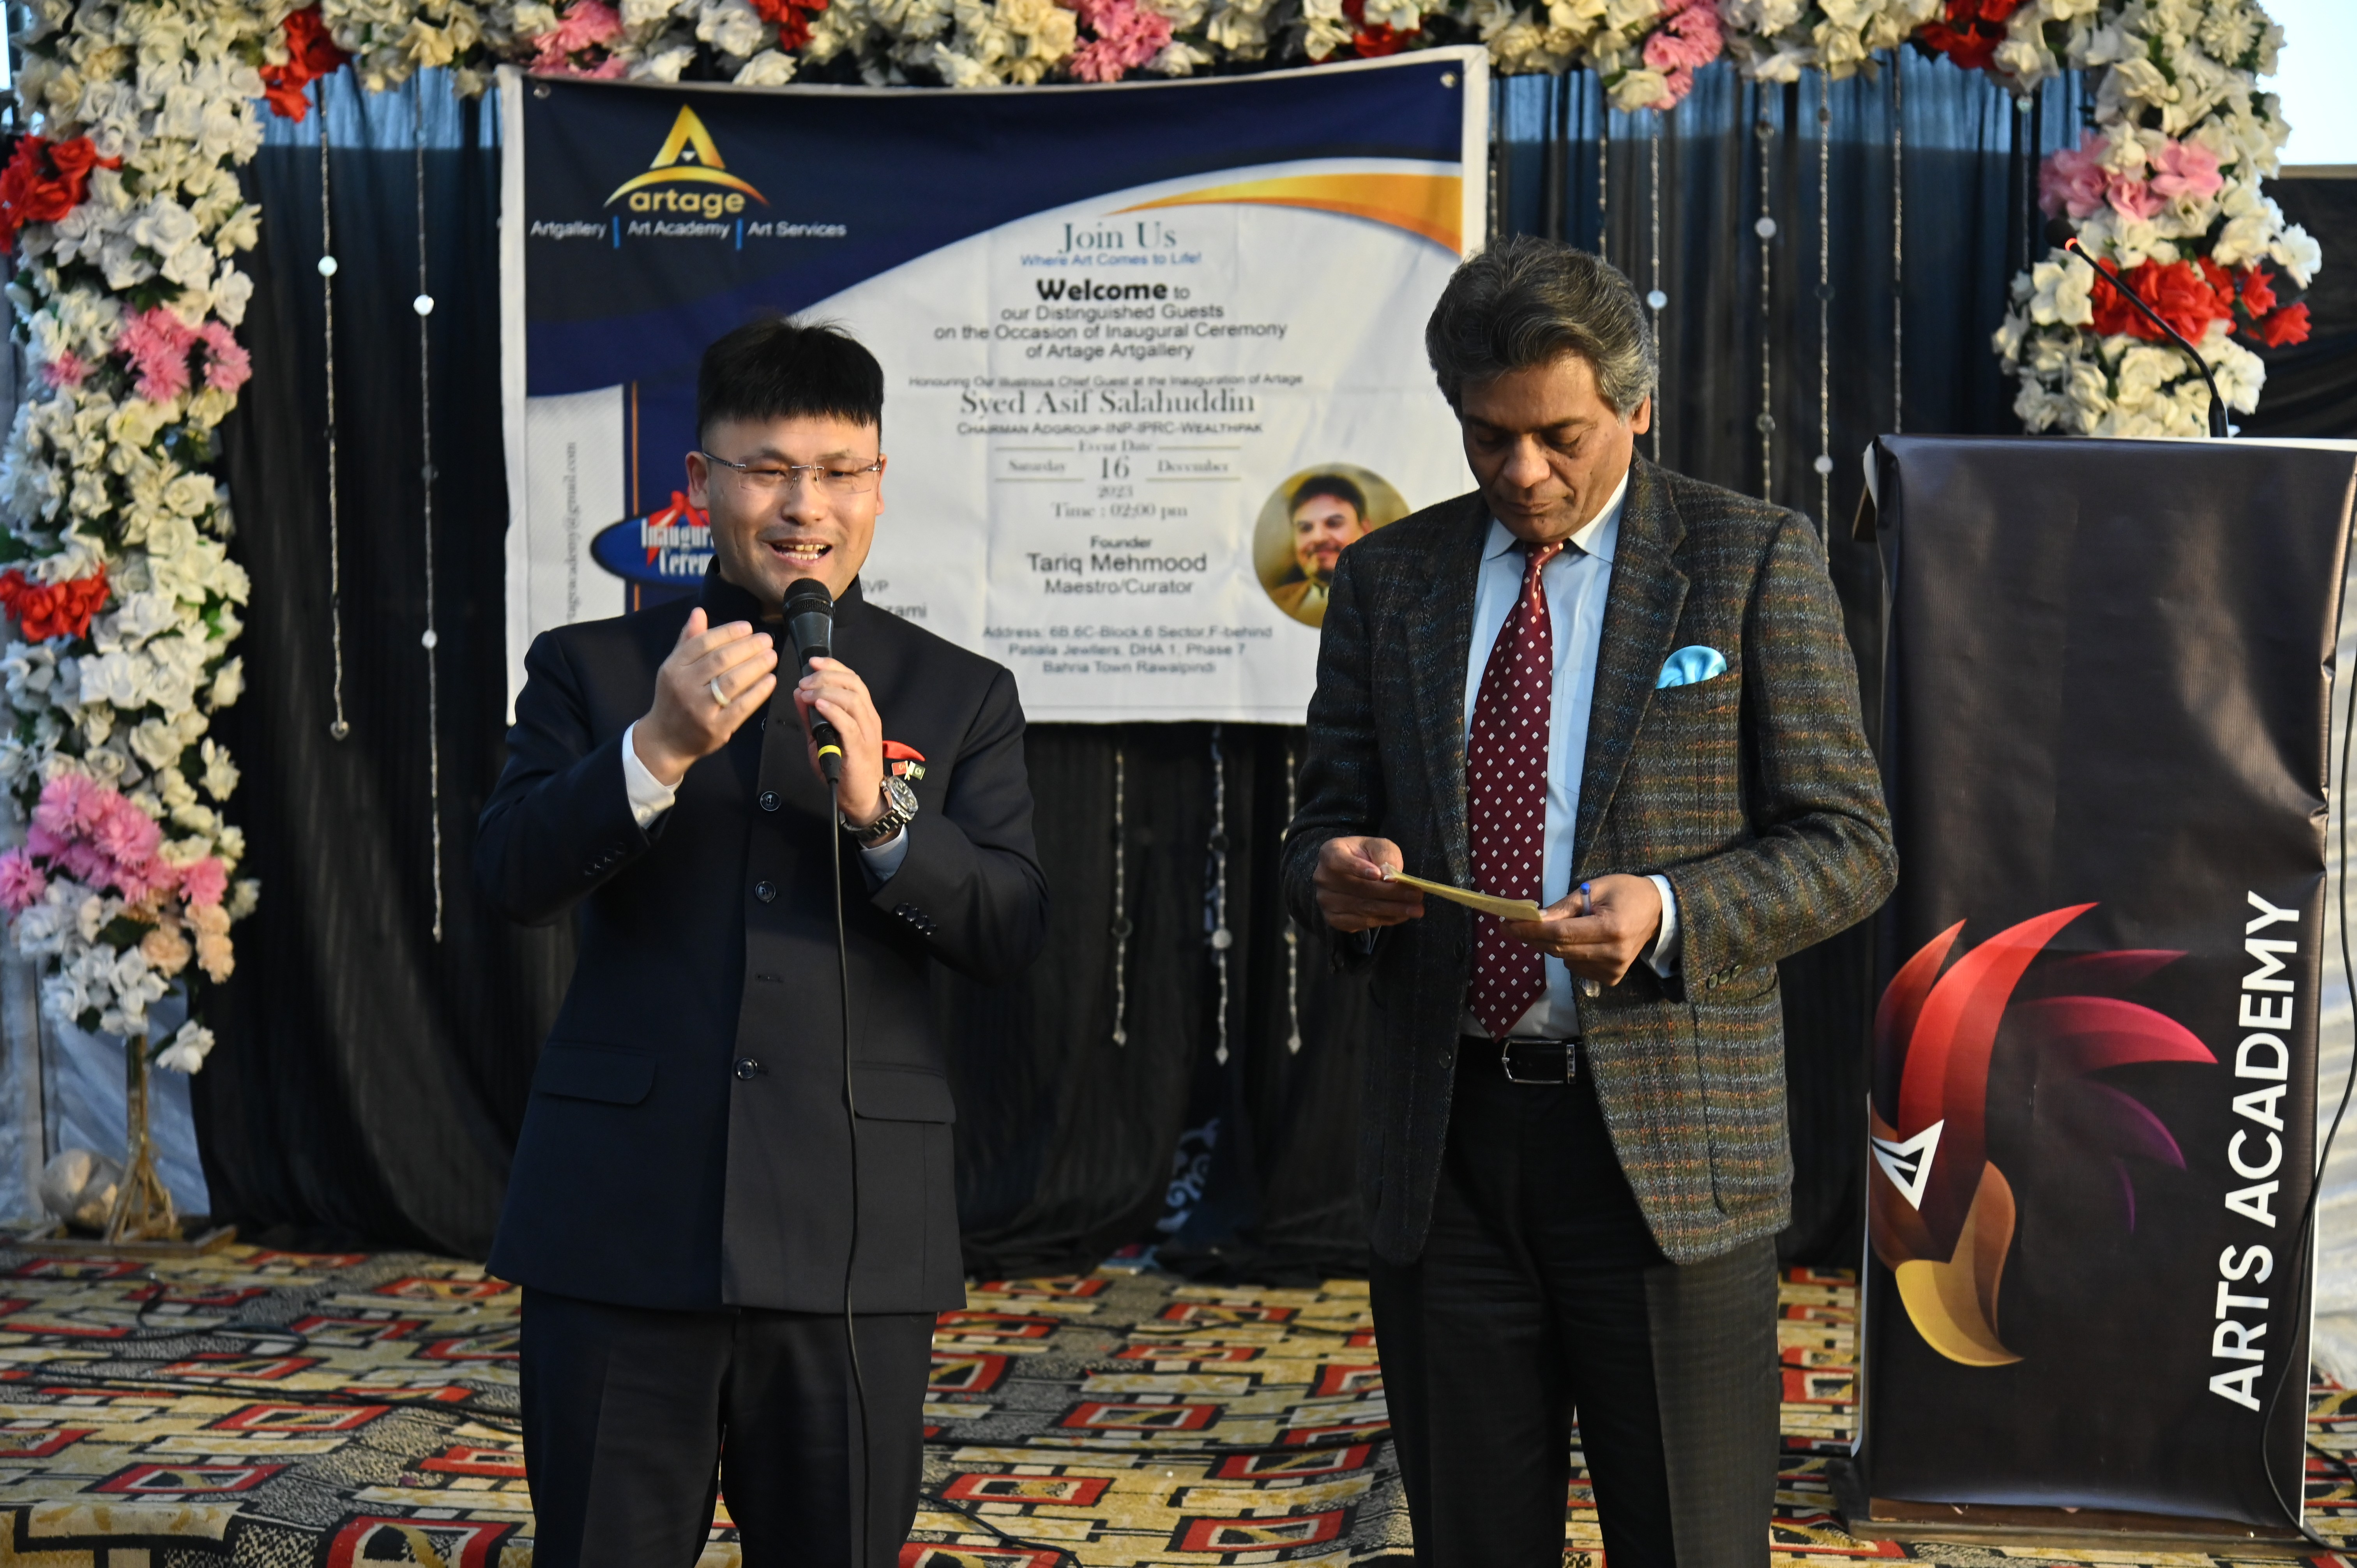 The inauguration ceremony of an artage artgallery aiming to showcase the hidden talent of a skilled artist